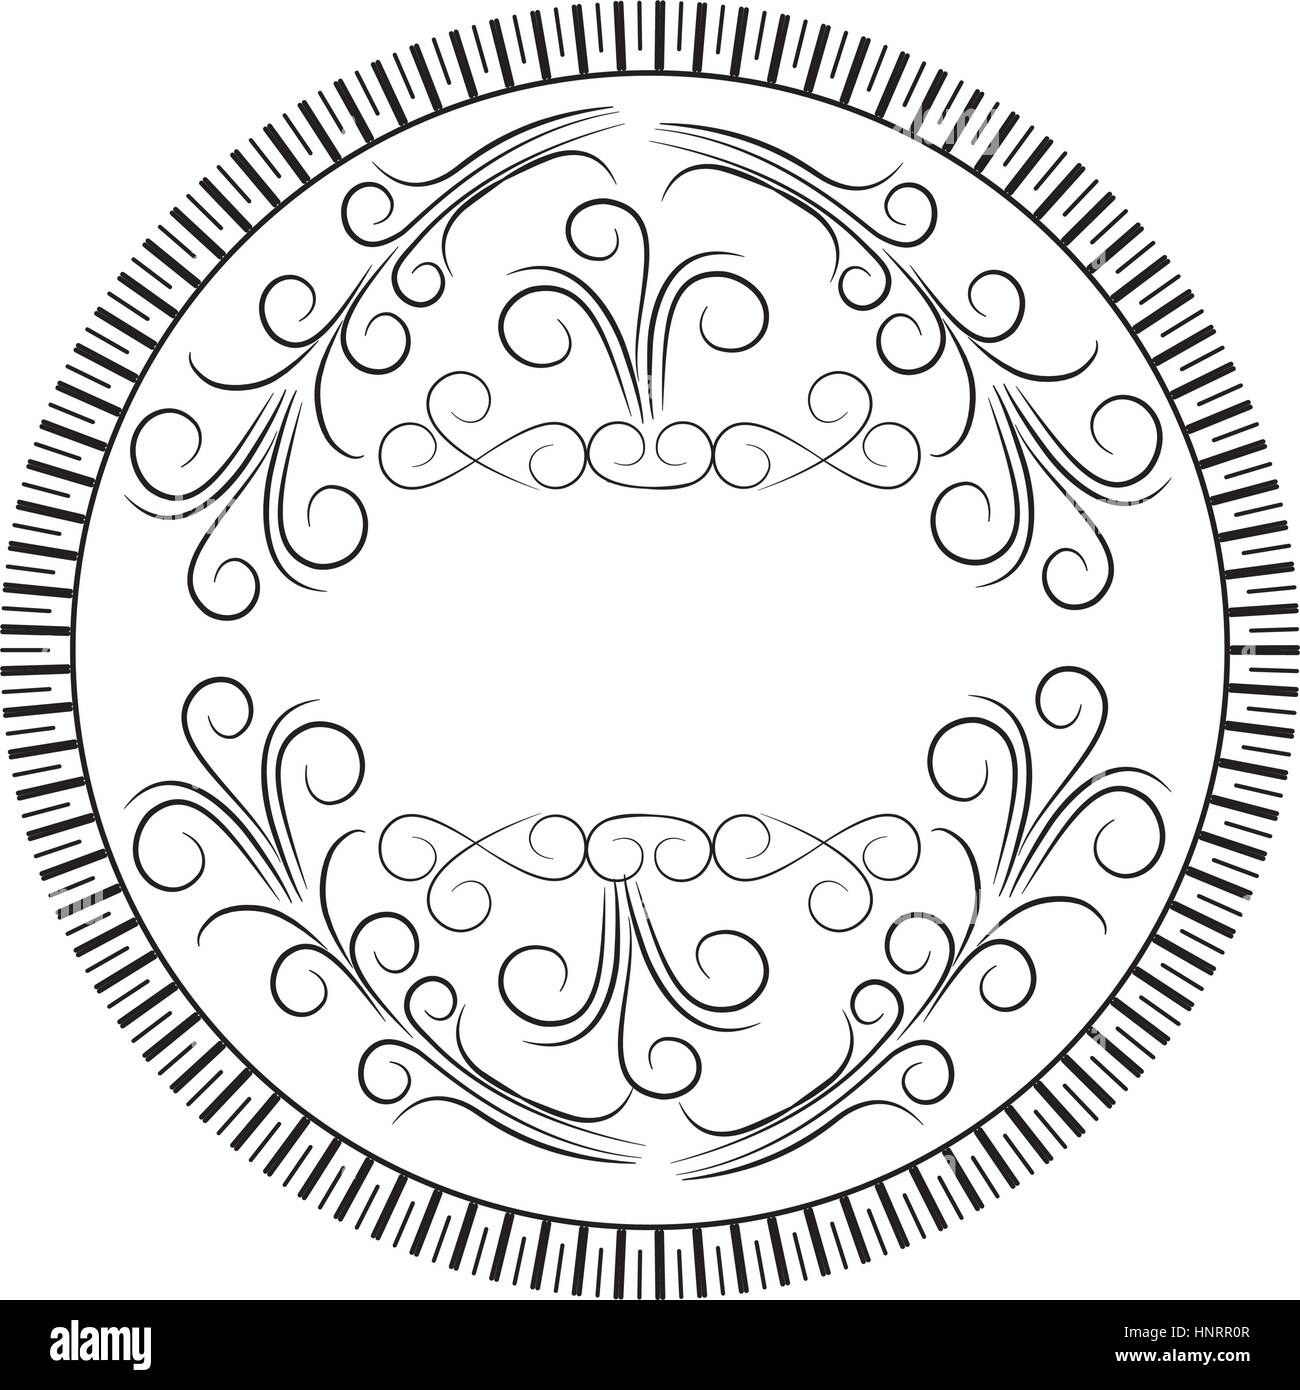 Scroll Frame  Free clipart images, Frame, Free clip art